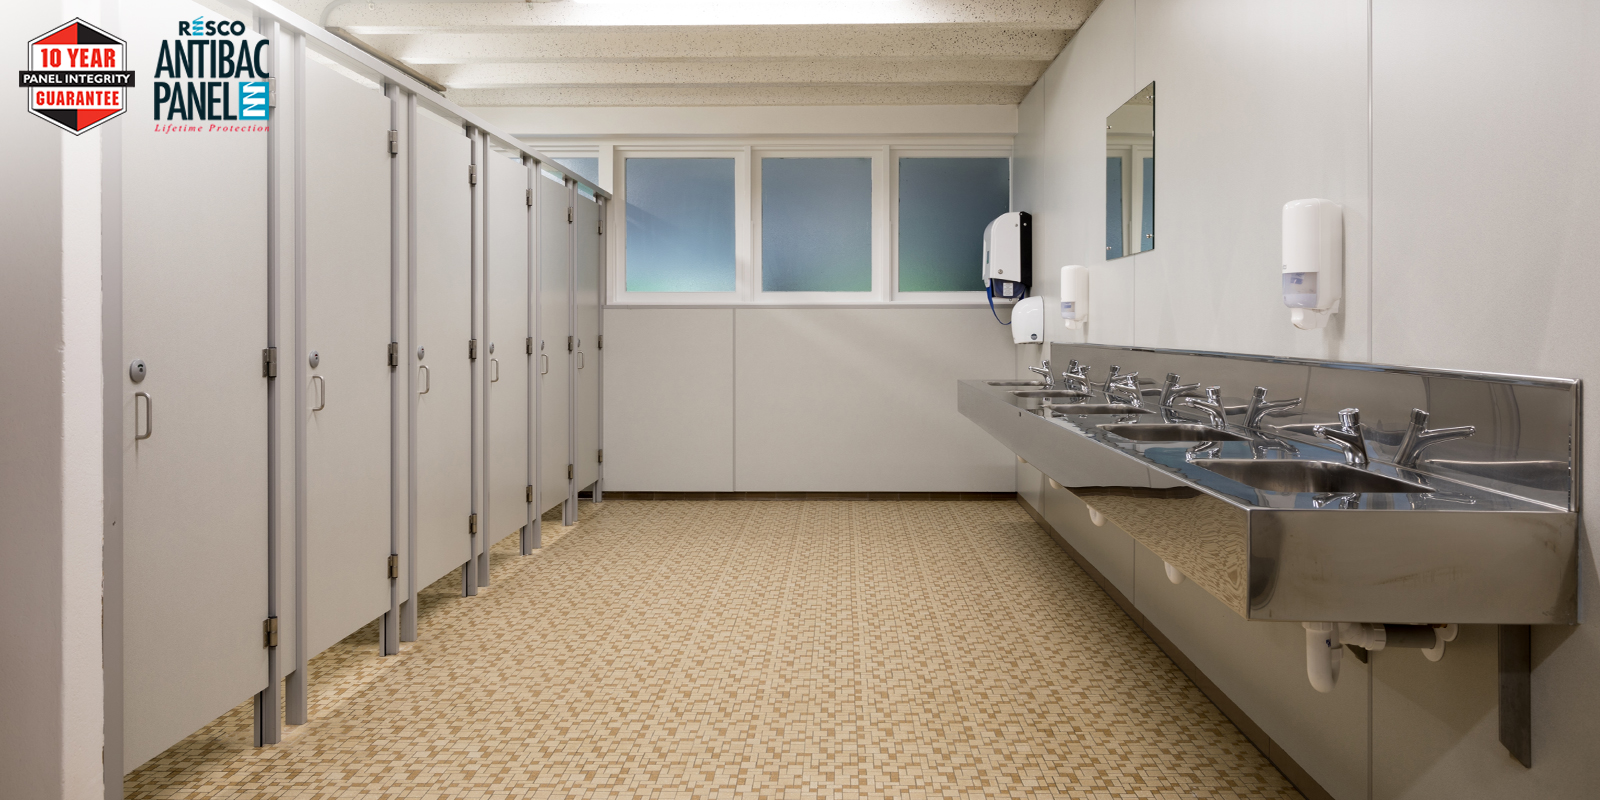 Robust existing Resco Compact Laminate facilities influence Dilworth School choice.